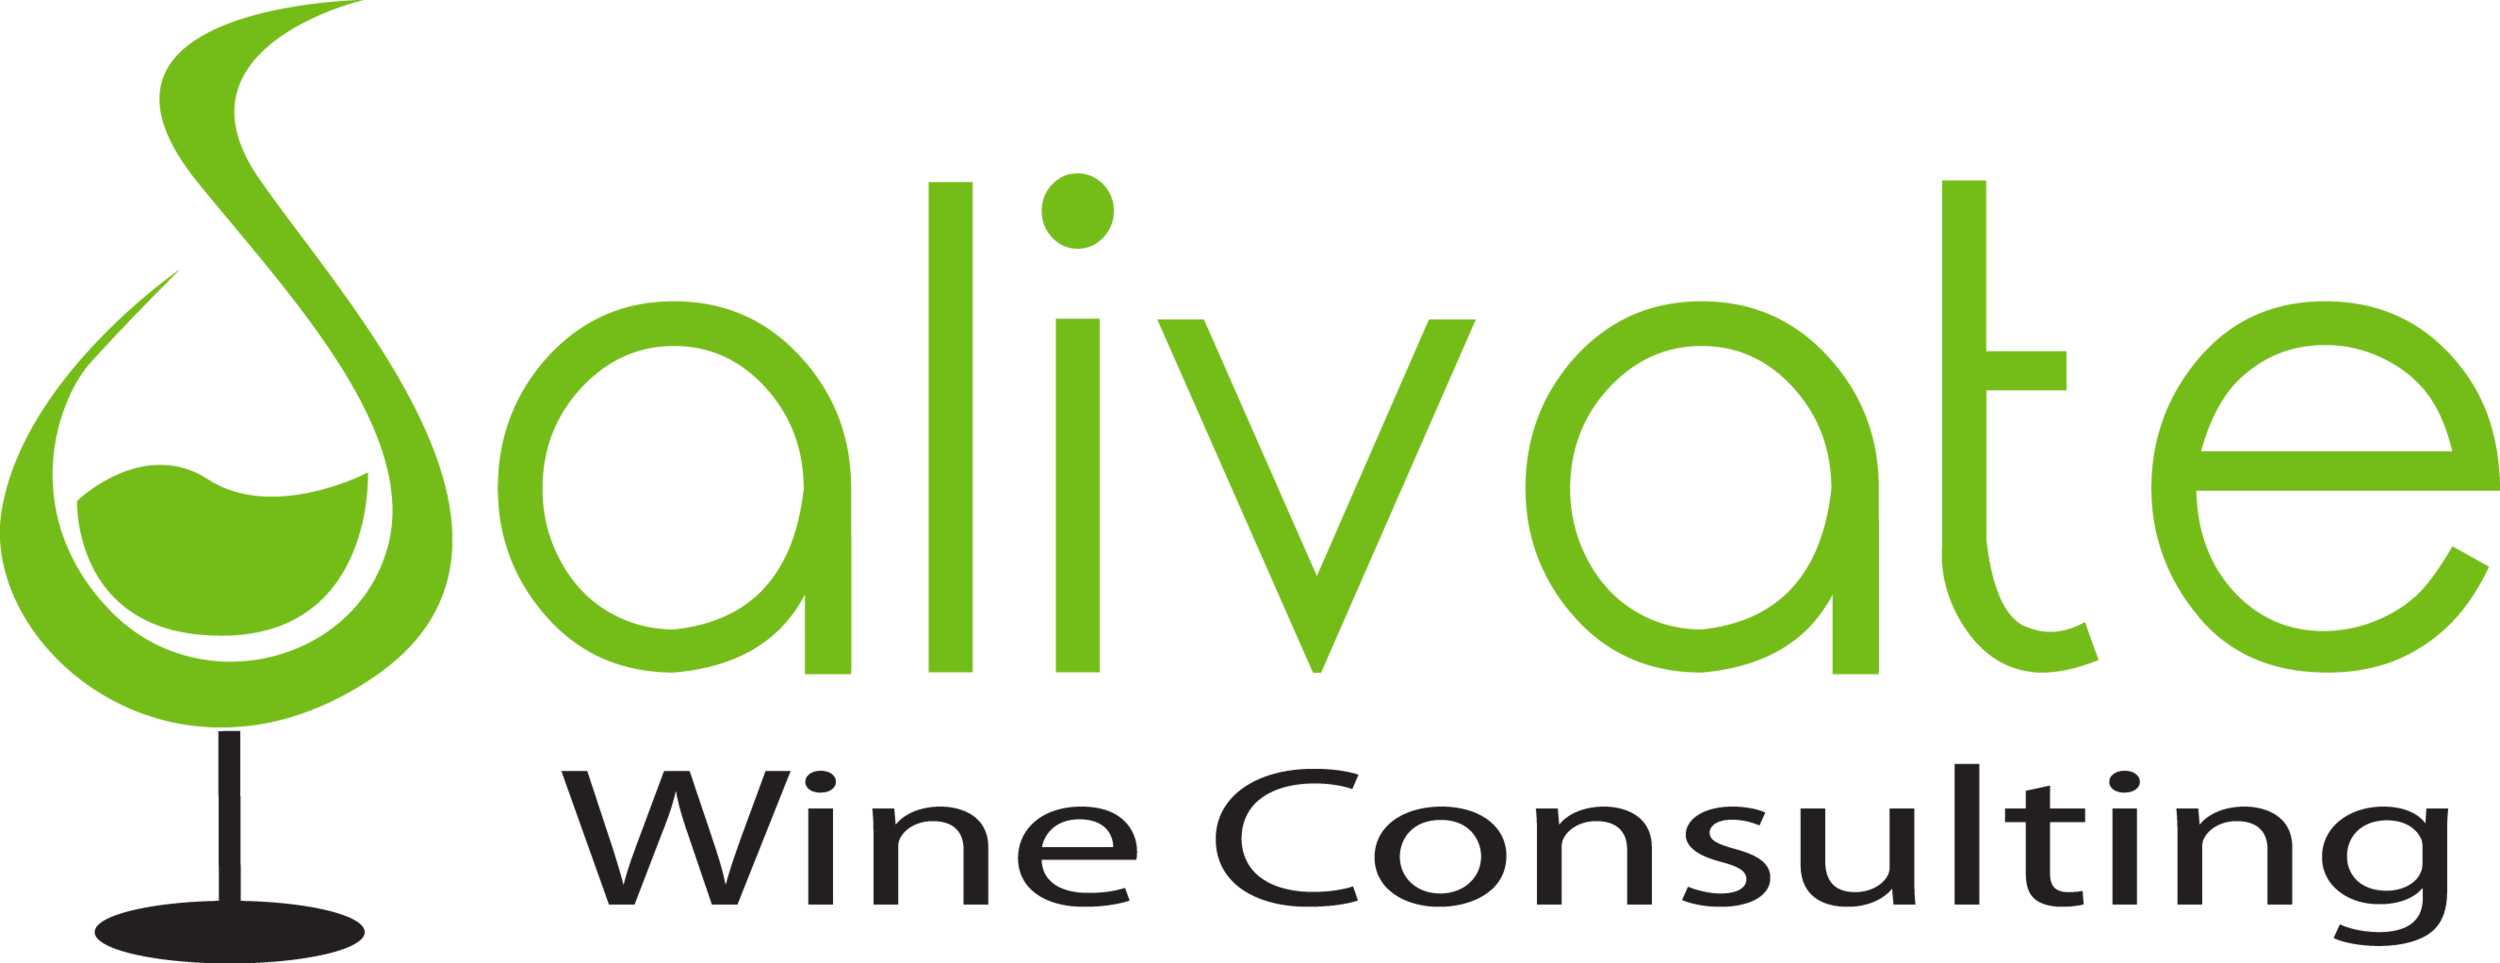 Salivate Wine Consulting